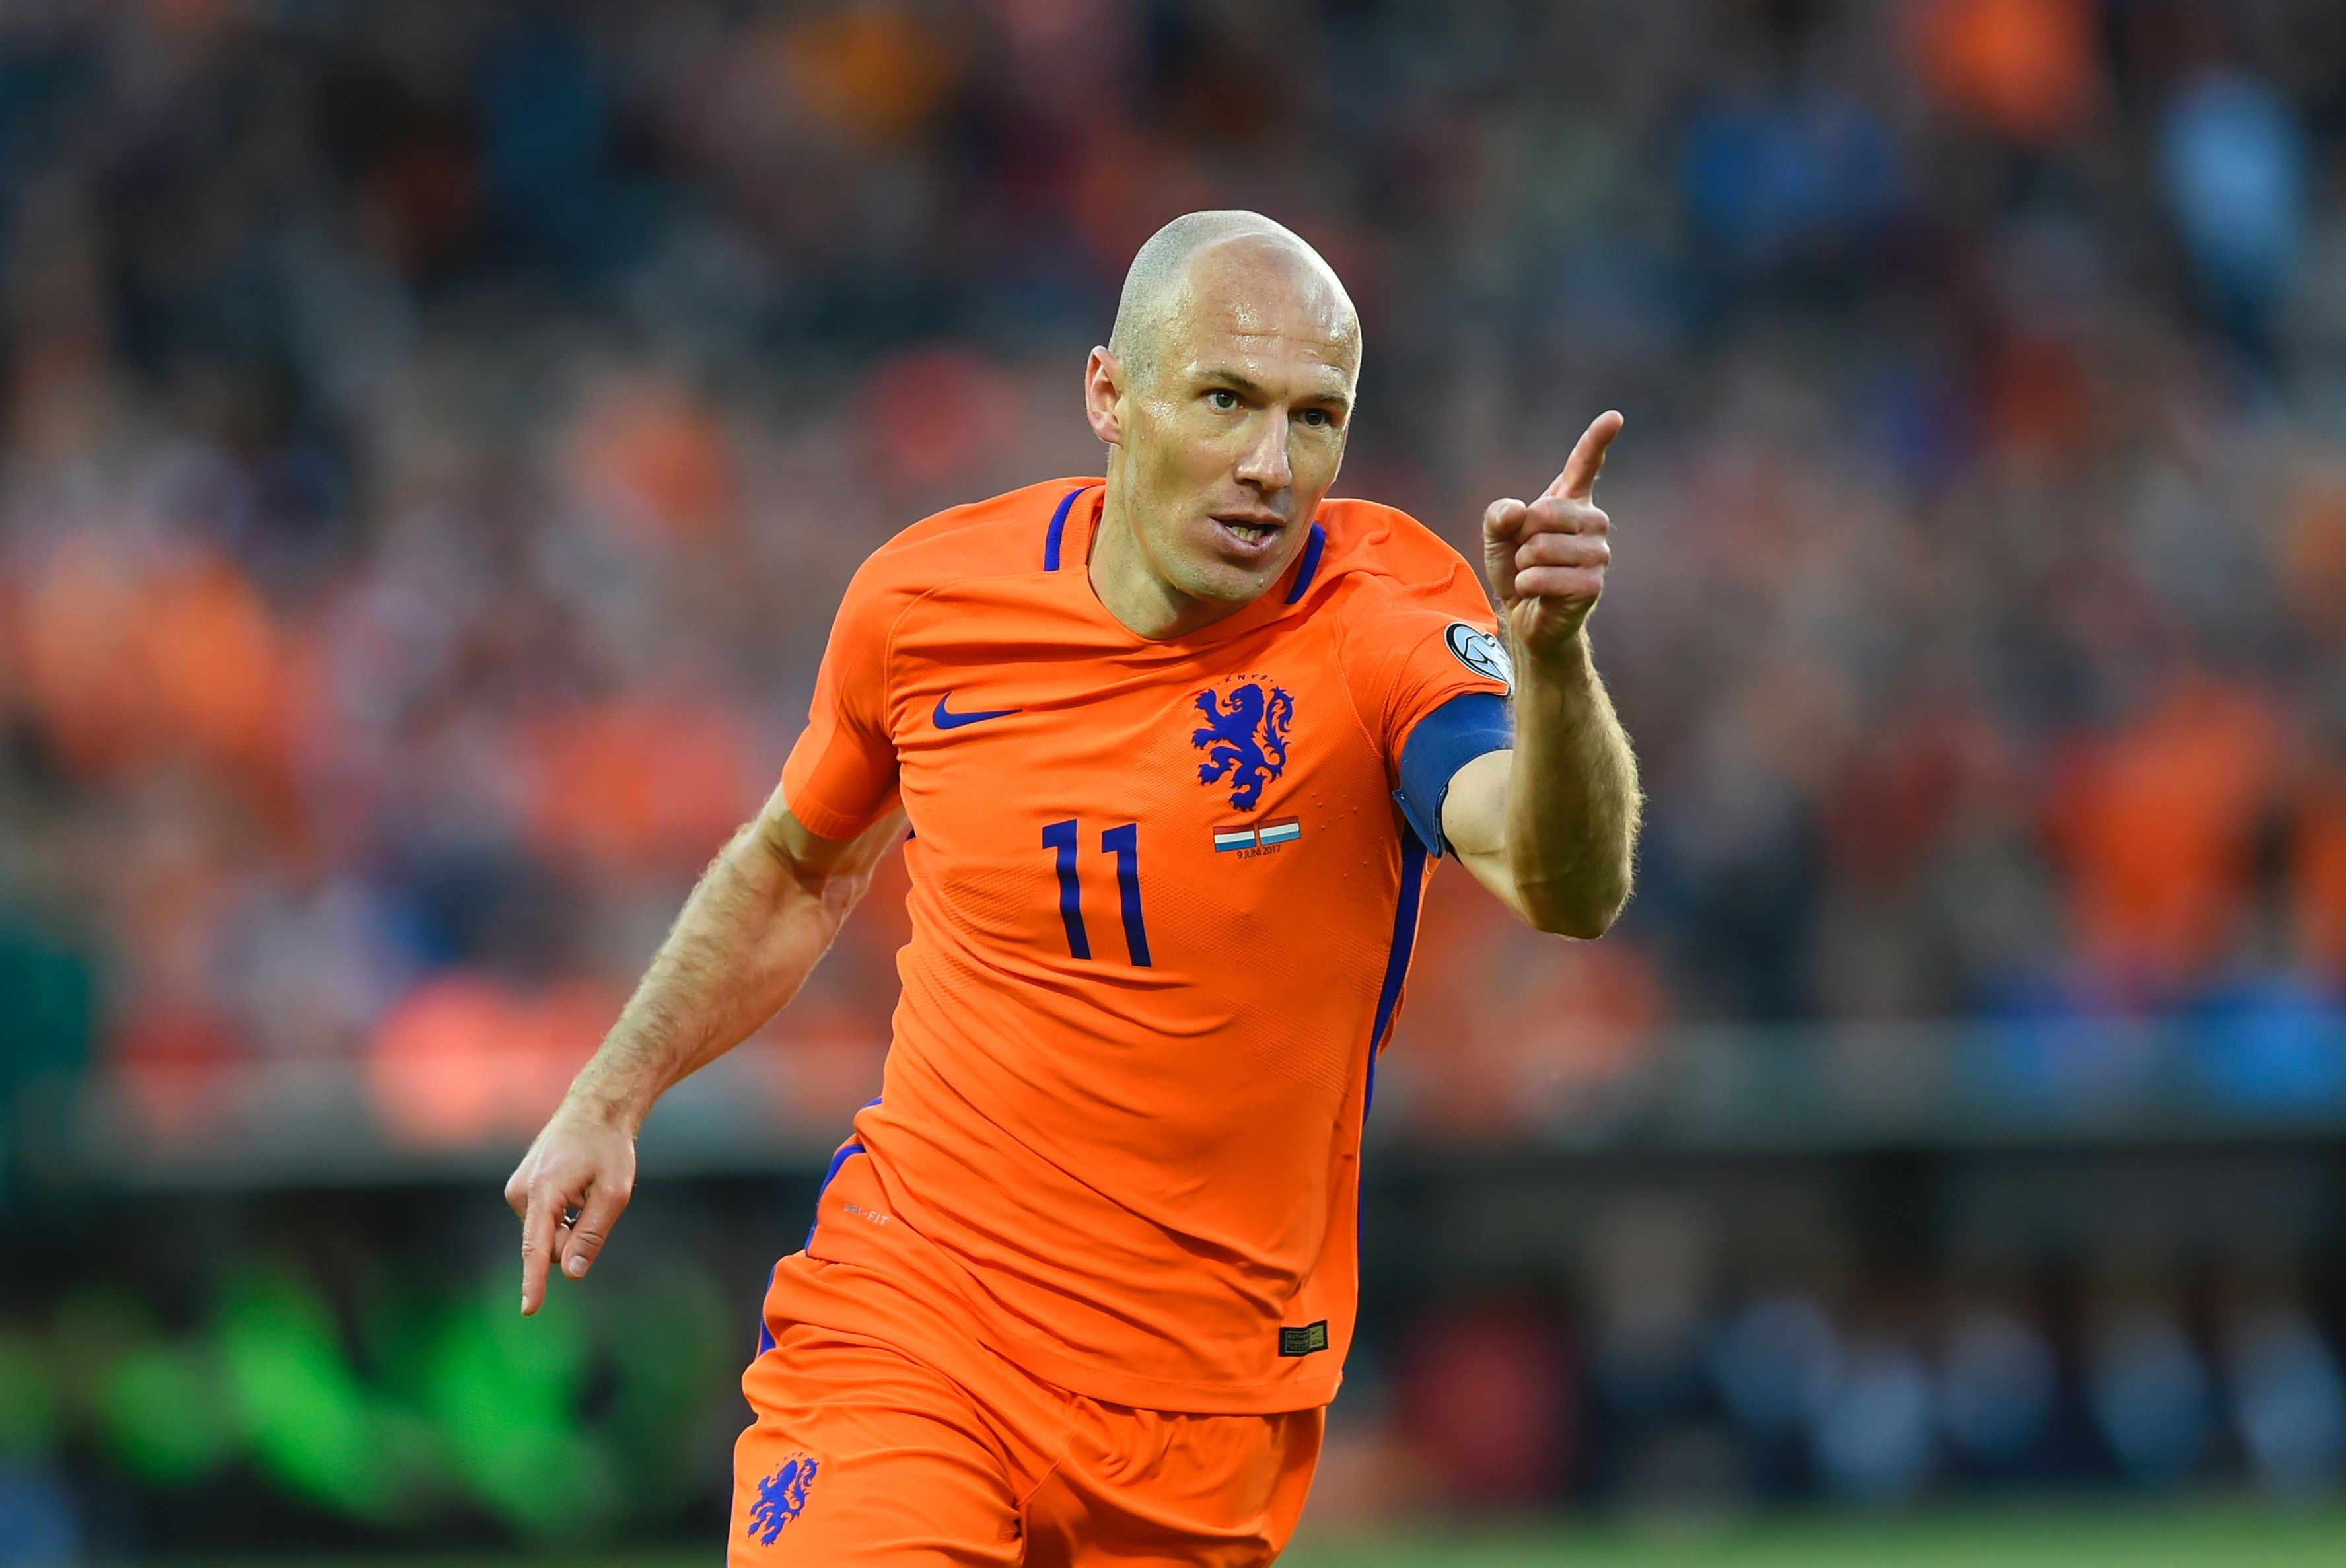 Arjen Robben celebrates after scoring for the Netherlands against Luxembourg. Photo: AFP